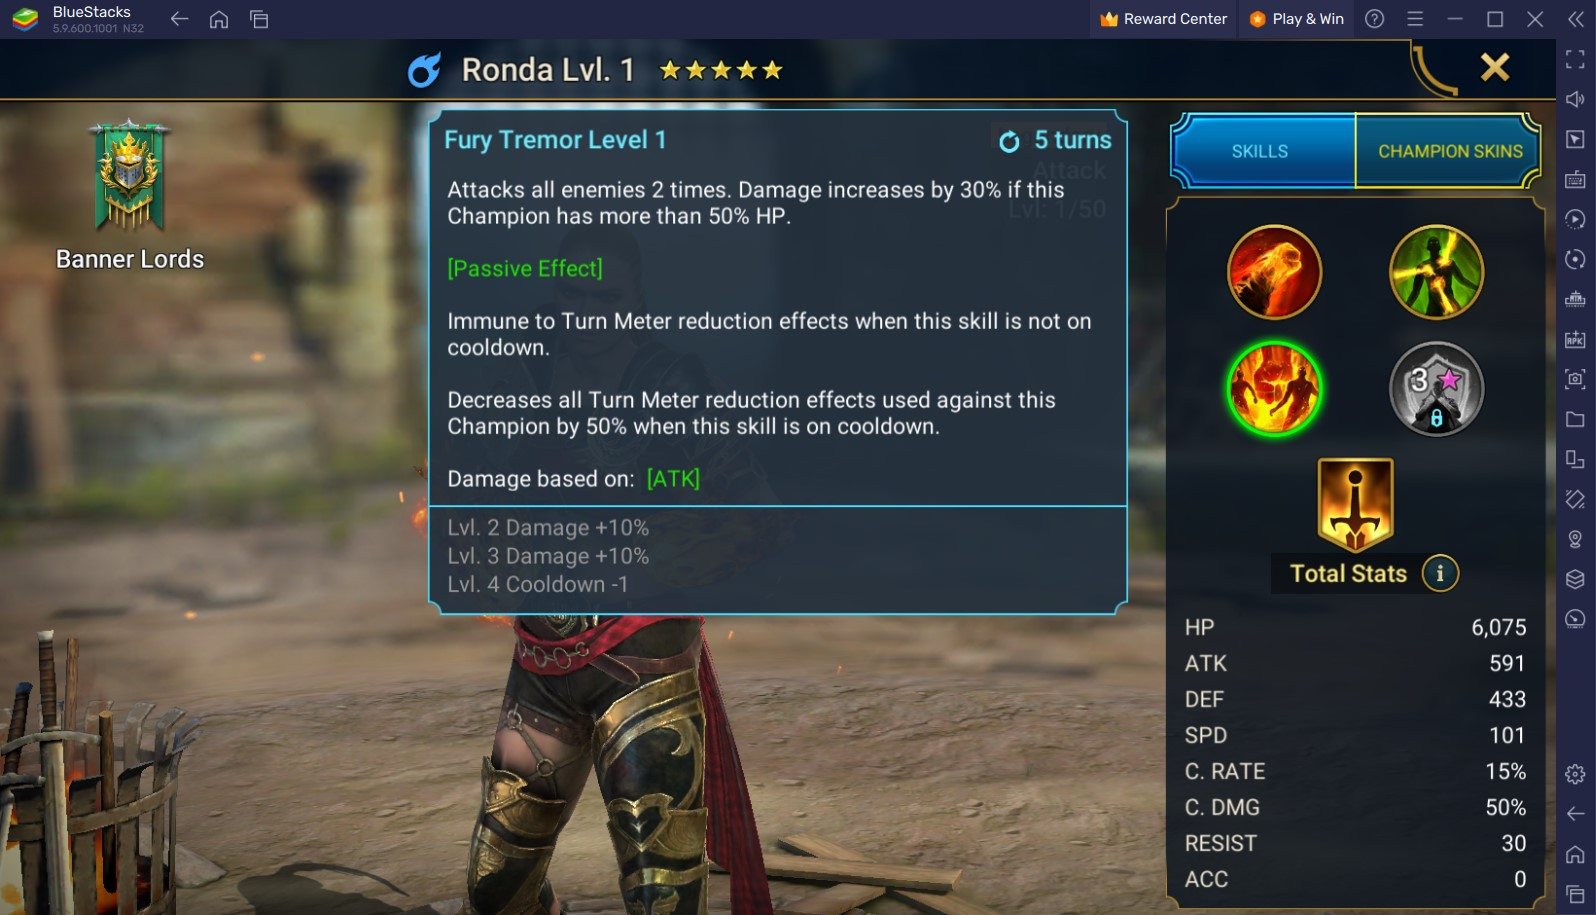 RAID: Shadow Legends – Ronda Guide for Abilities, Masteries, Artifacts and Team Comps